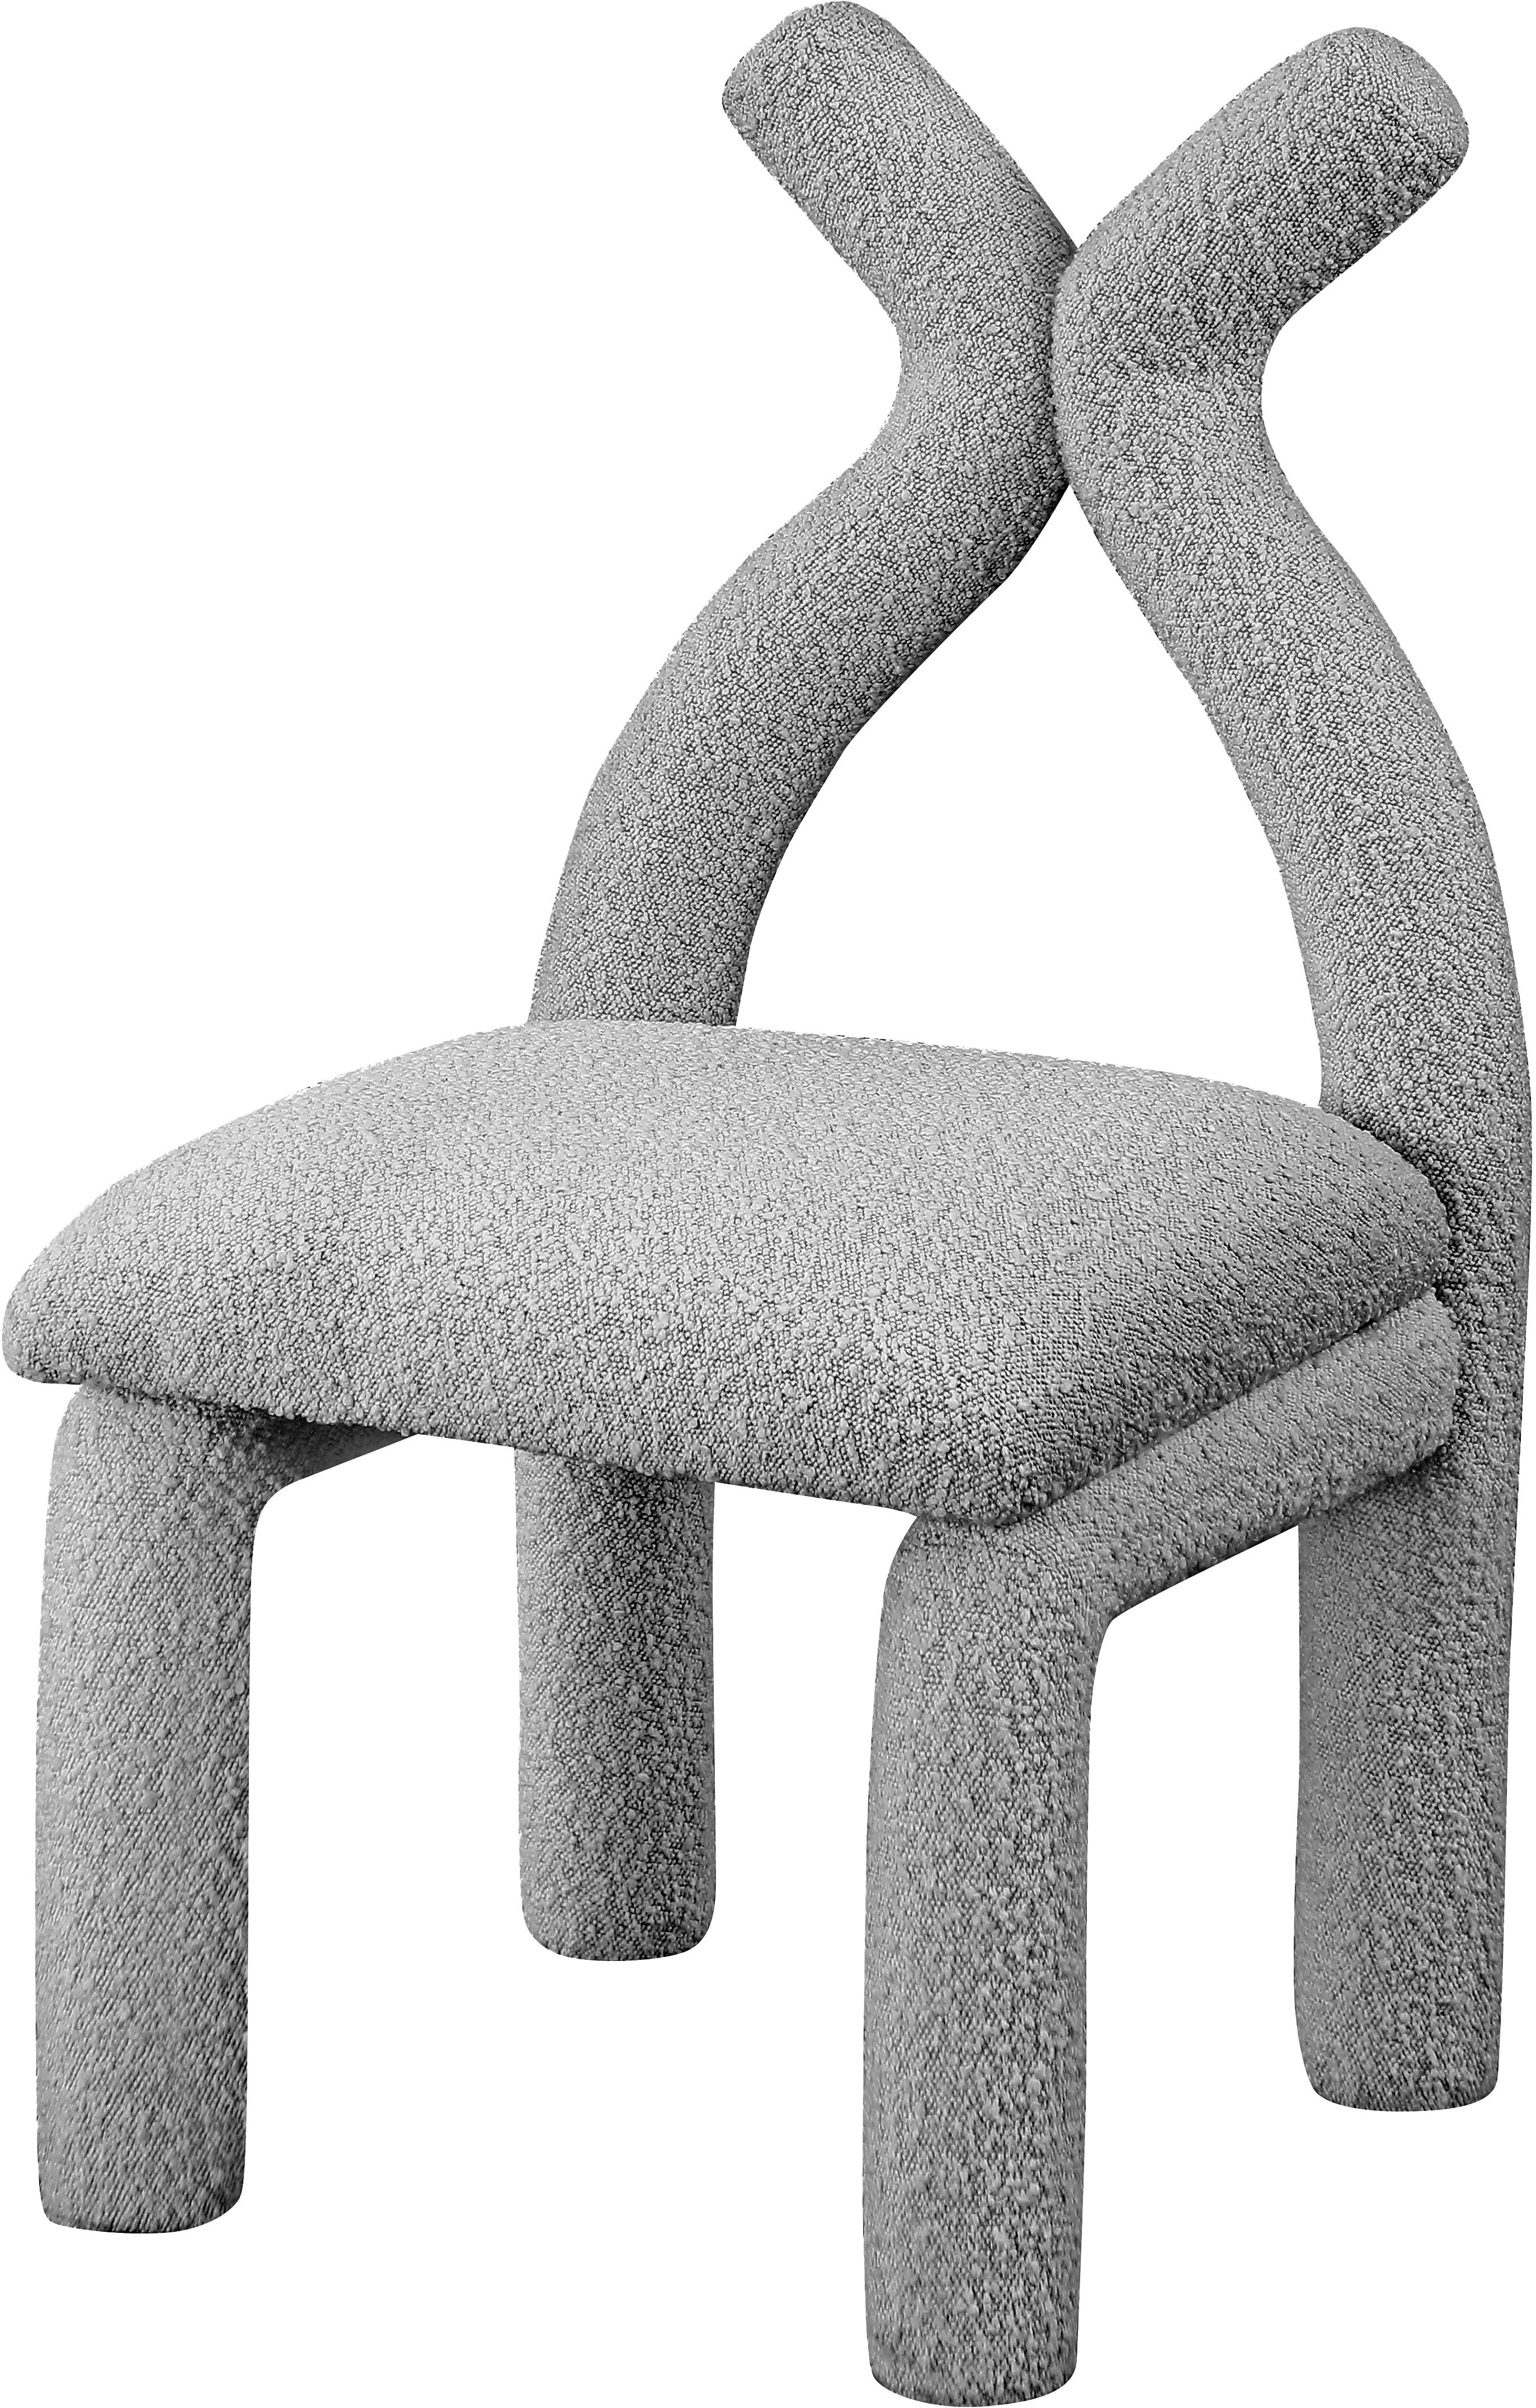 Xena Boucle Fabric Accent Chair / Dining Chair